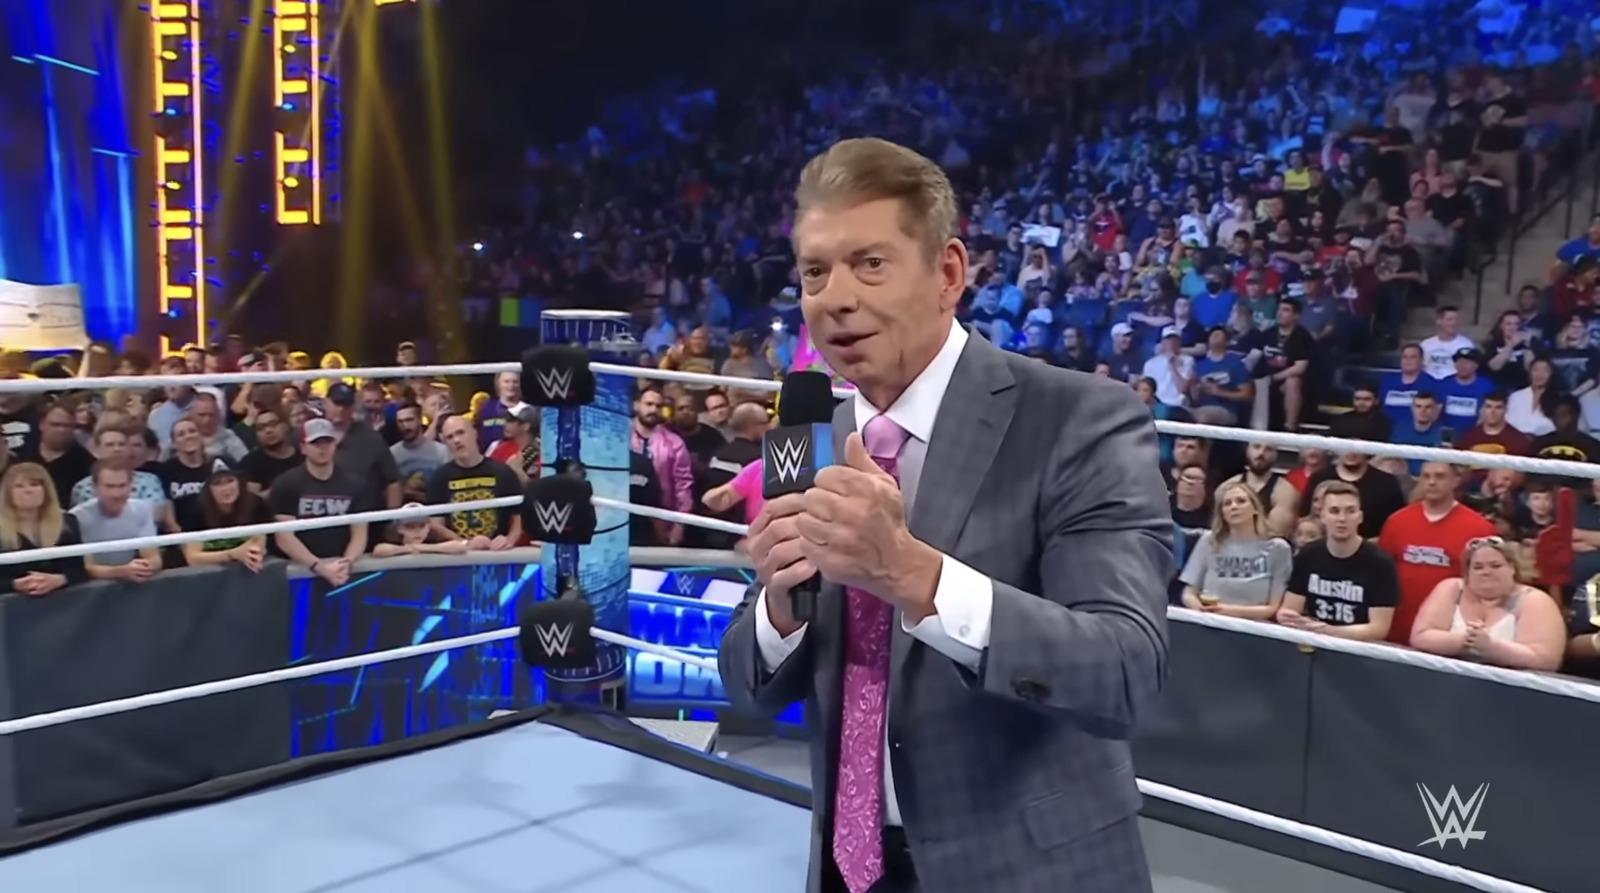 WWE’s Vince McMahon accused of sexual misconduct by former employee